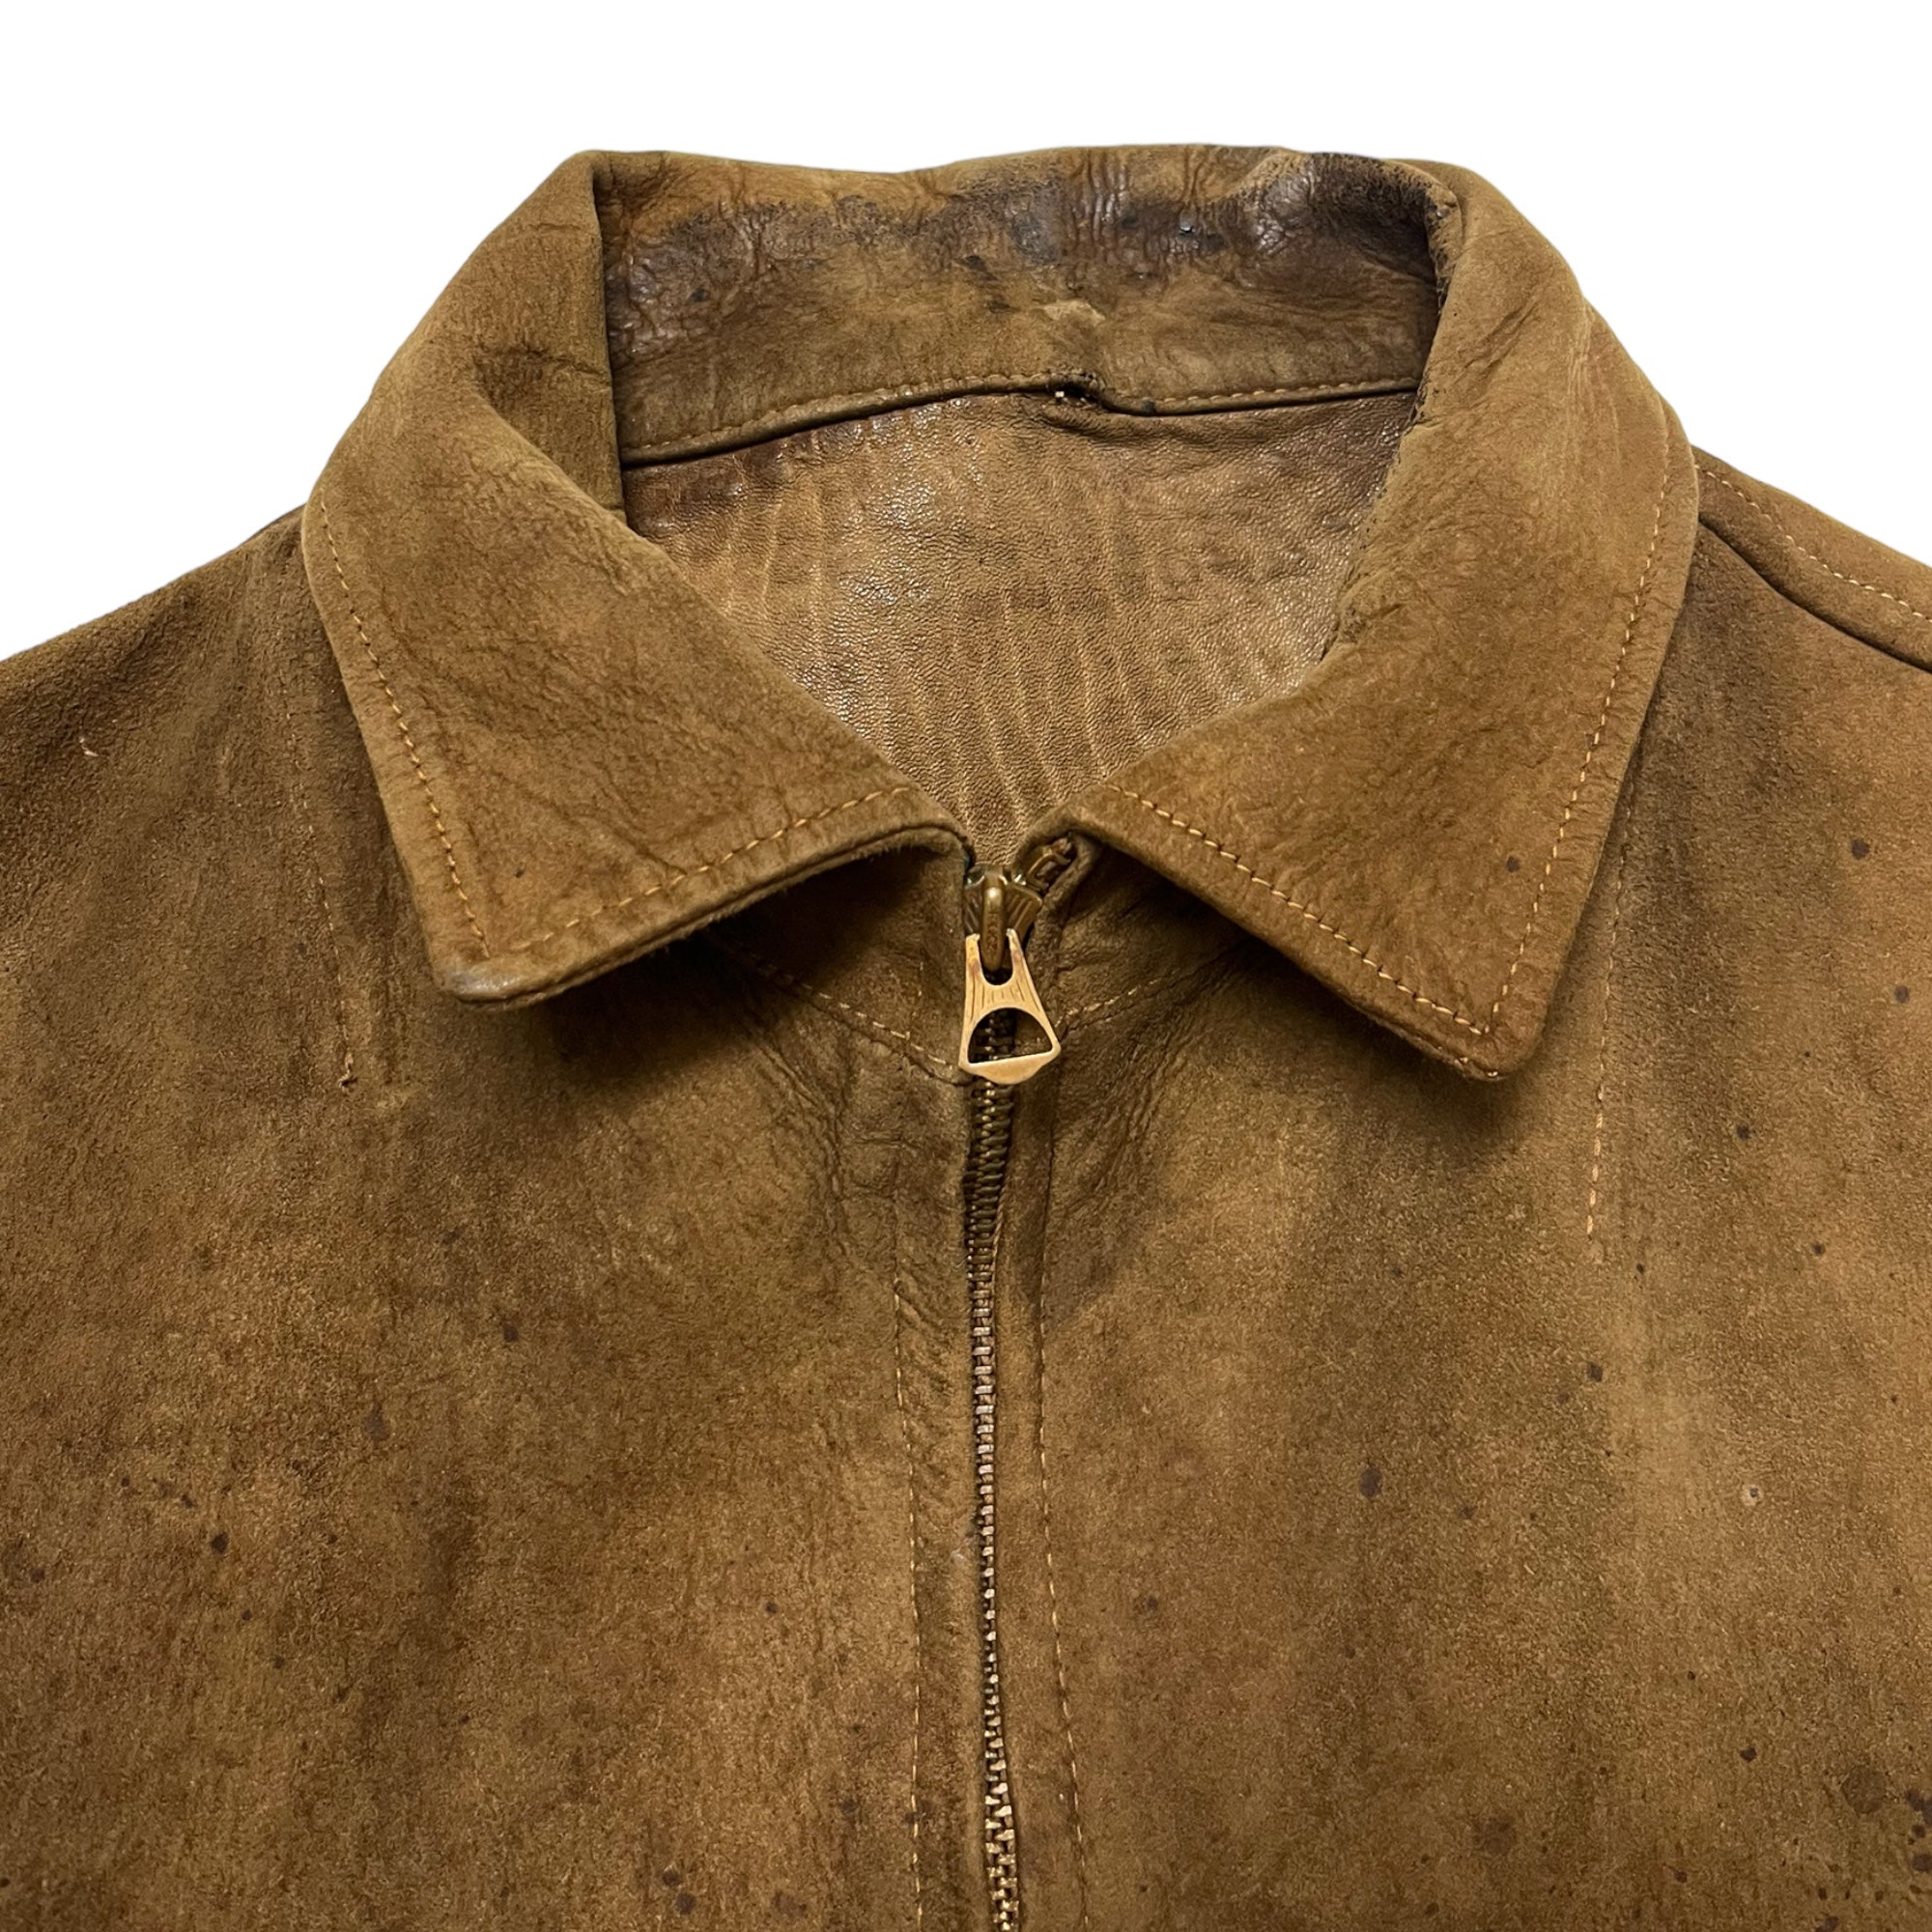 1940s Gordon Leathers Calfskin Leather Jacket - Tanned Brown - S/M